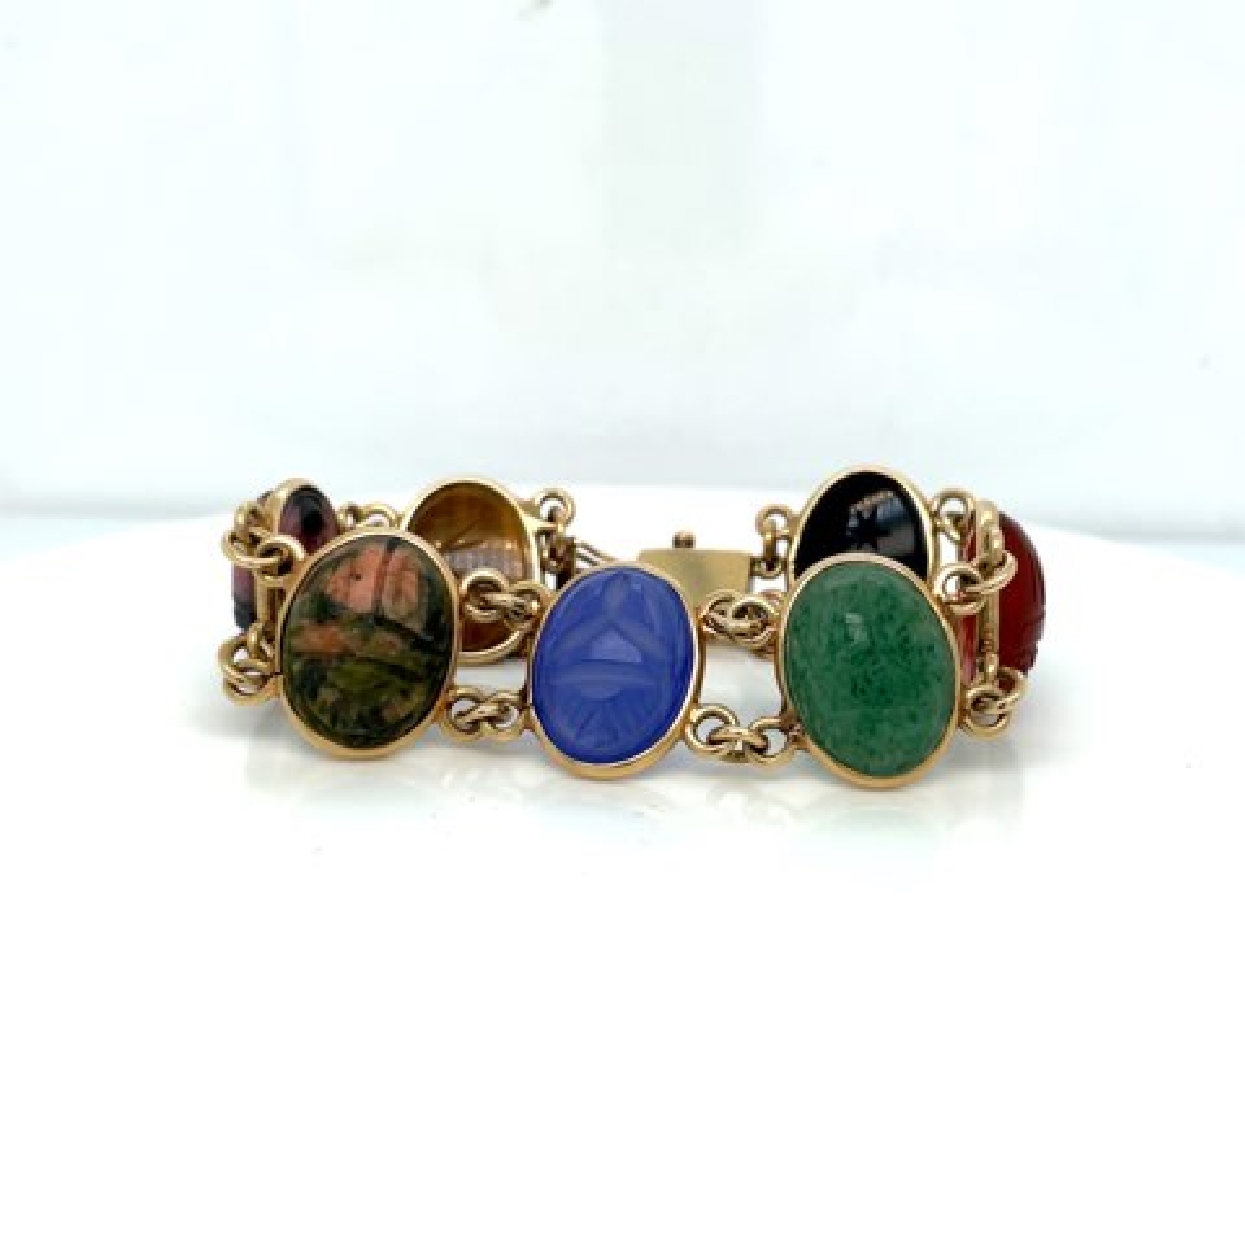 14K Yellow Gold Scarab Bracelet with Tigers Eye; Agate; Onyx; Carnelian; and Chalcedony

7 Inches